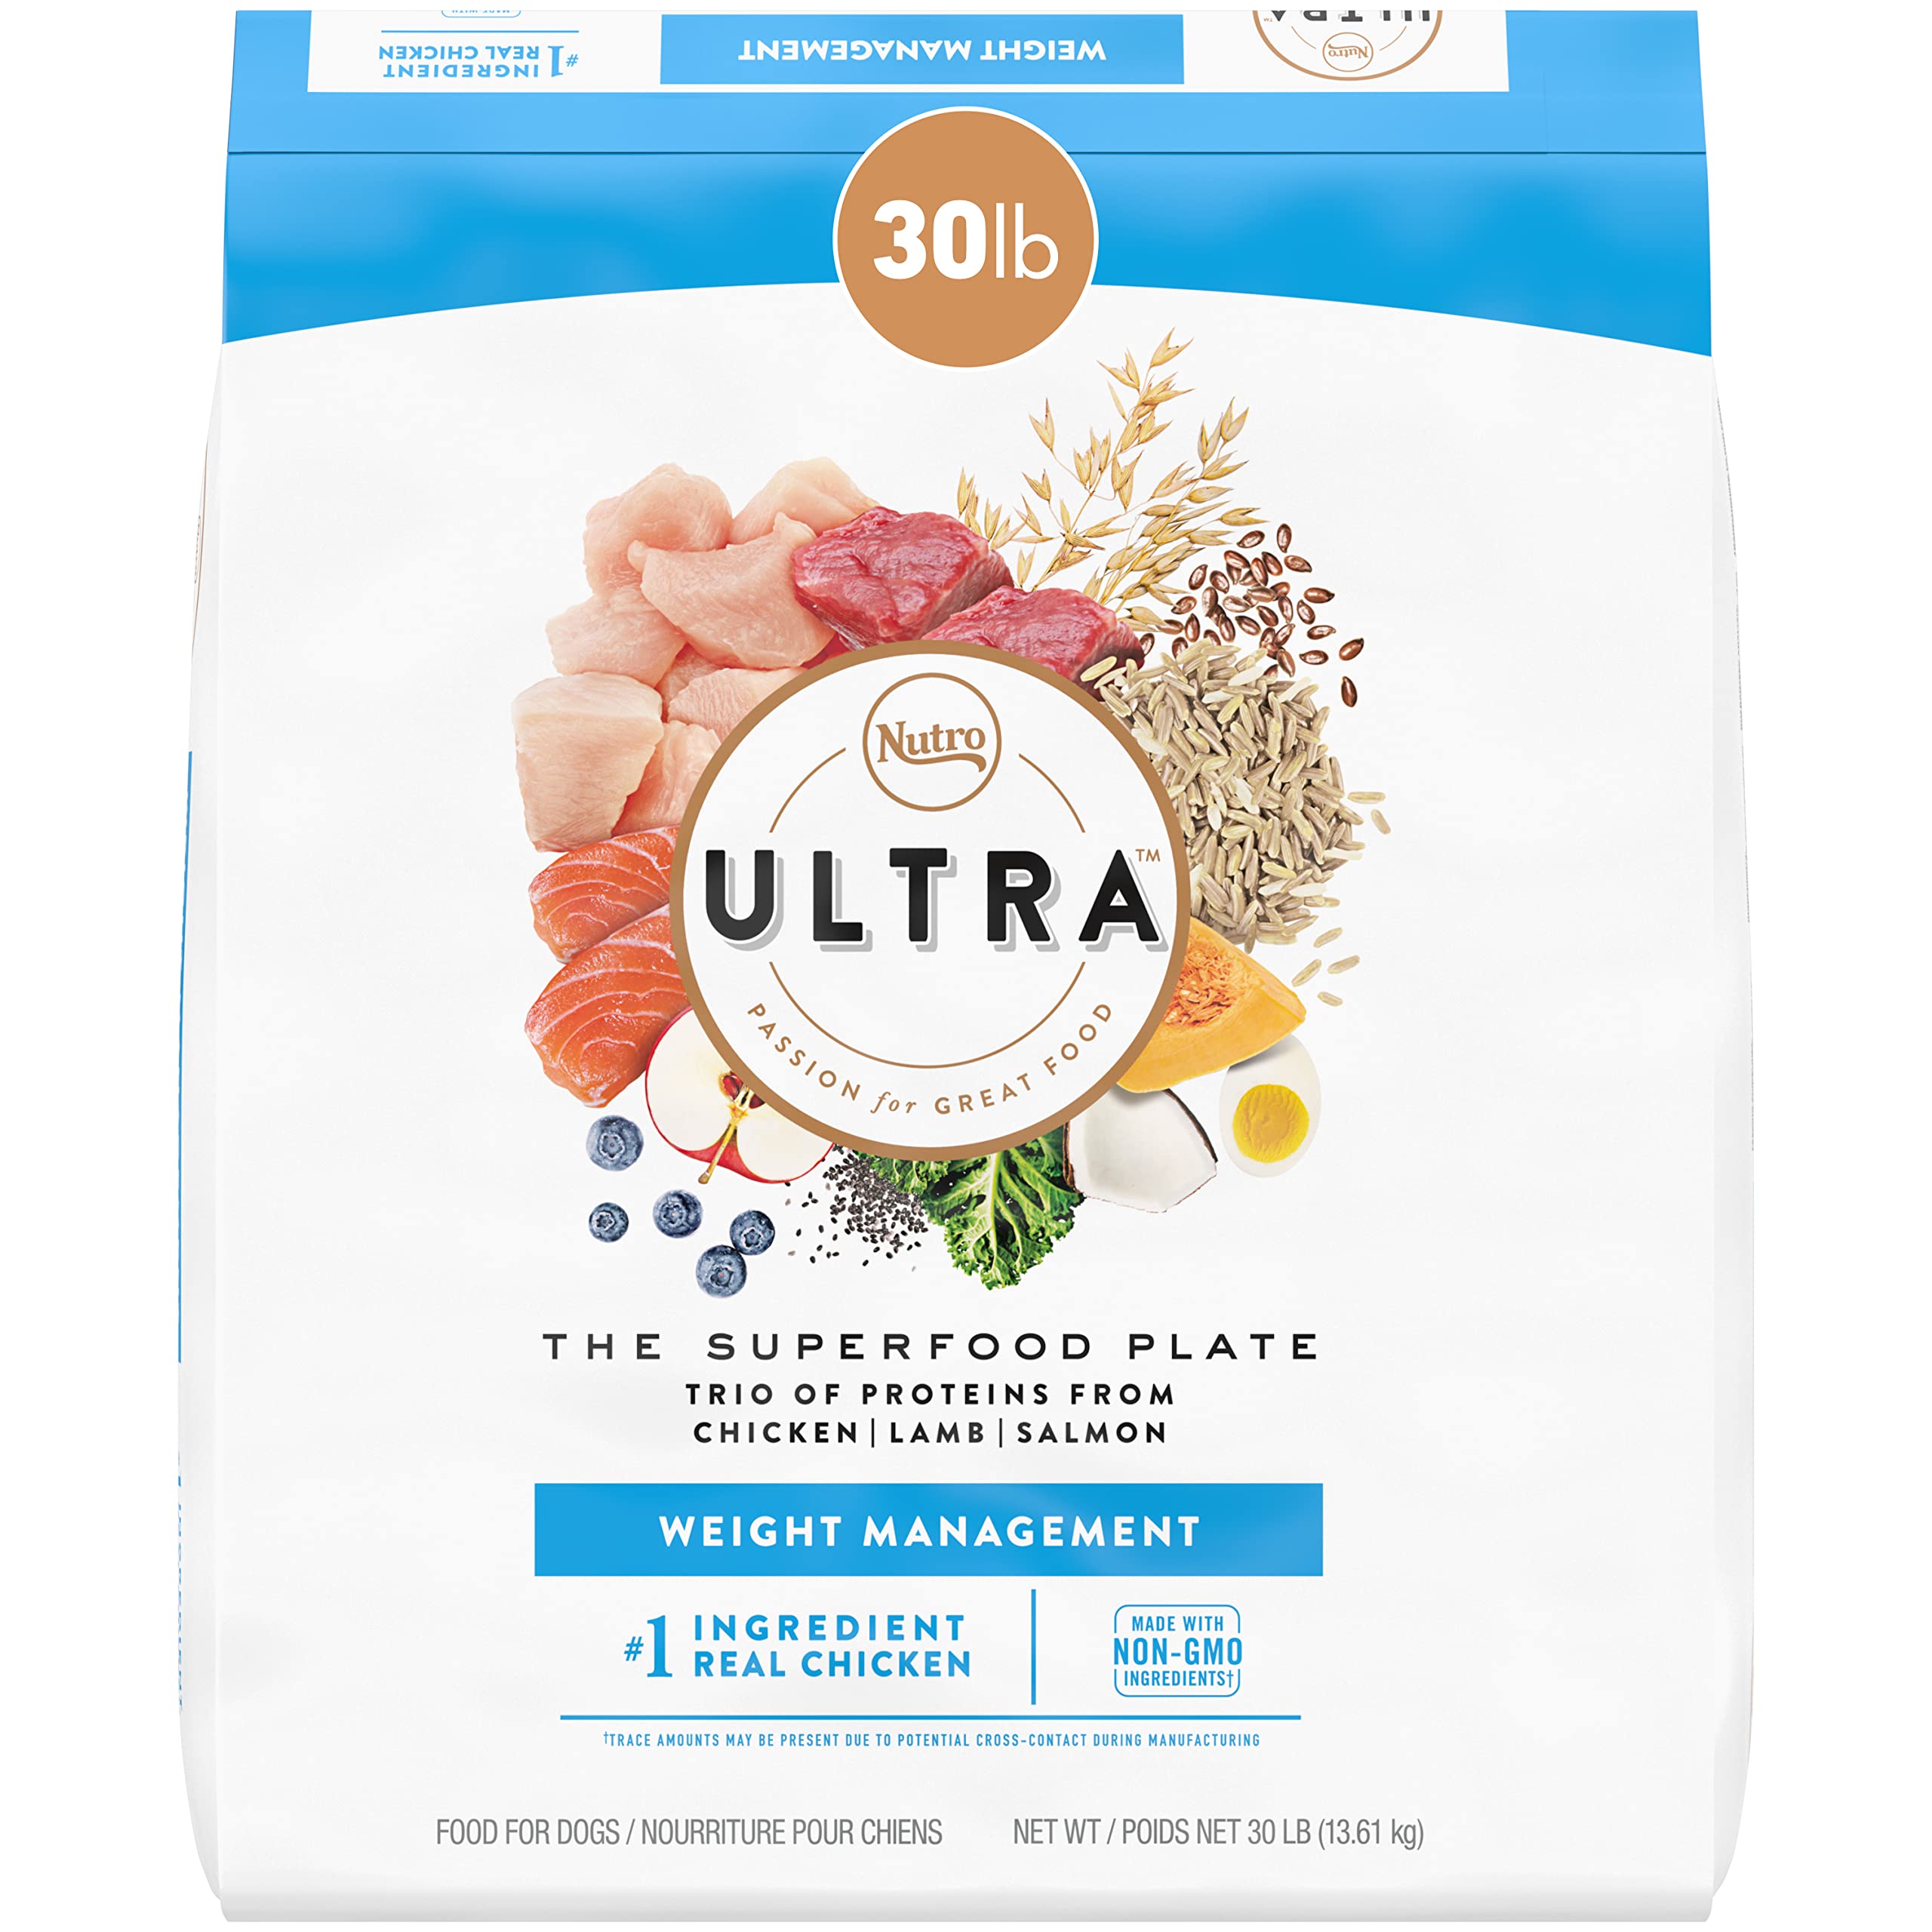 NUTRO ULTRA Adult Weight Management High Protein Natural Dry Dog Food for Weight Control with a Trio of Proteins from Chicken, Lamb, and Salmon 30 lb. Bag for $23 with S&S